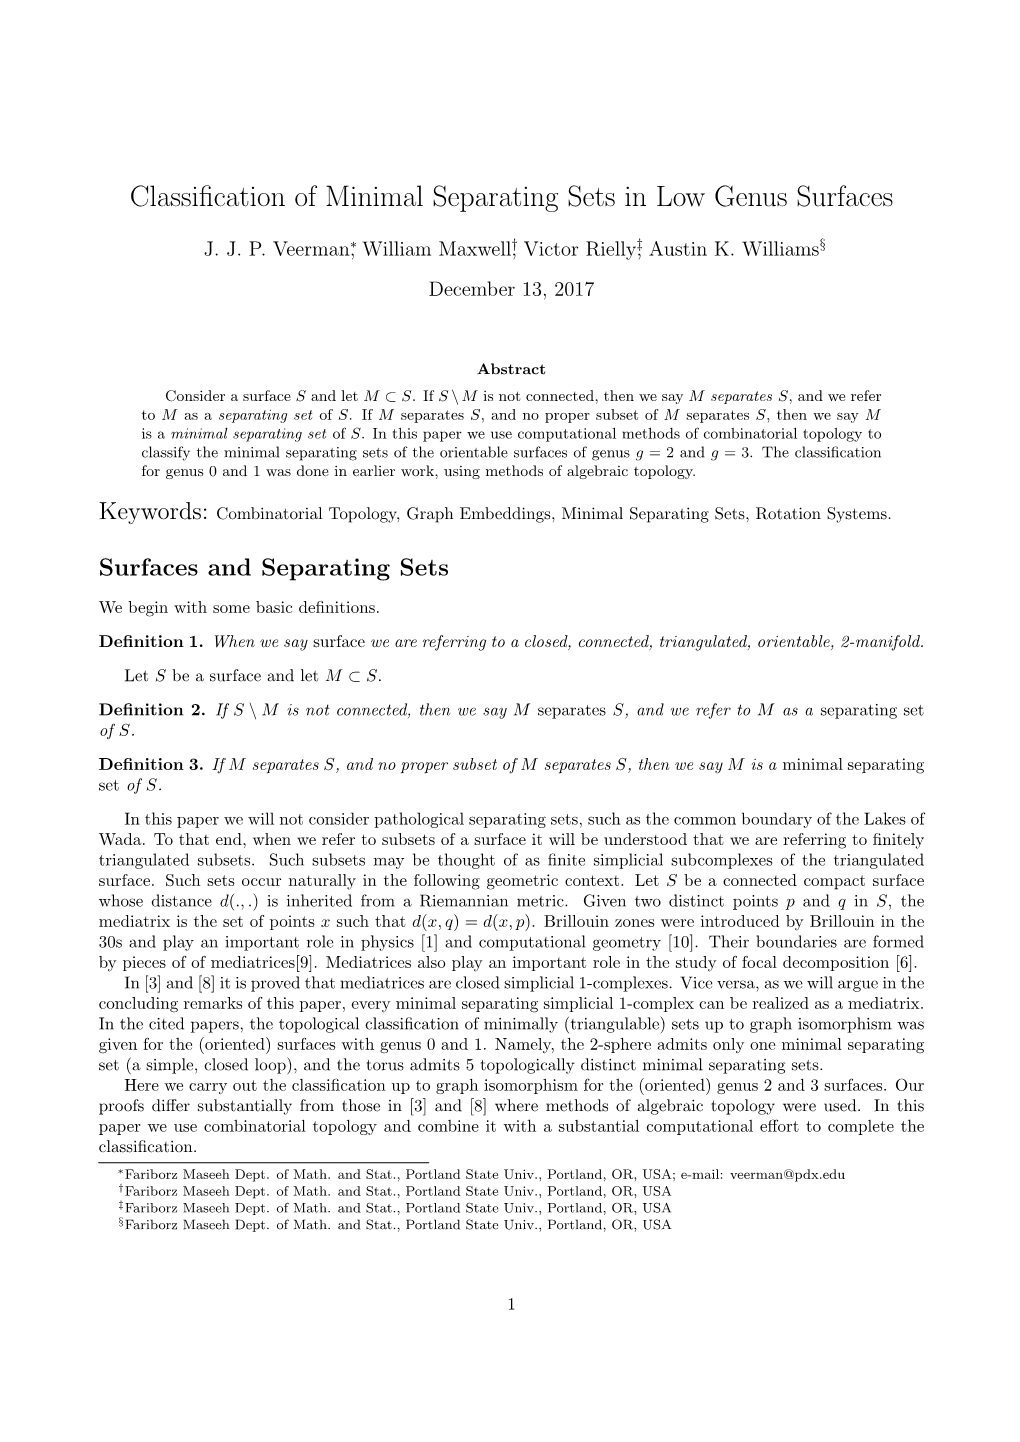 Classification of Minimal Separating Sets in Low Genus Surfaces